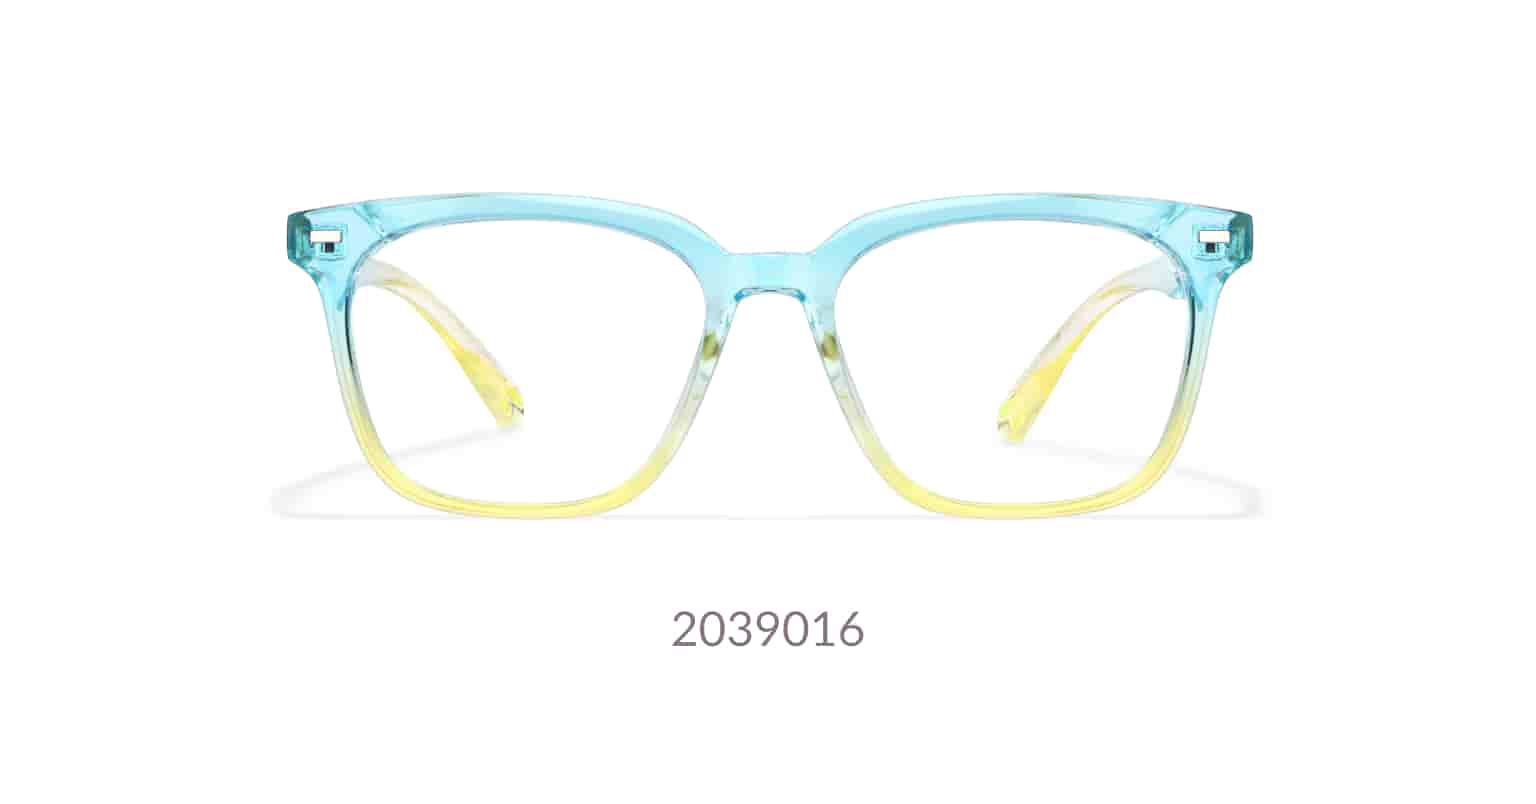 Image of zenni remakes andaman kids' square glasses #2039016 against a white background. 